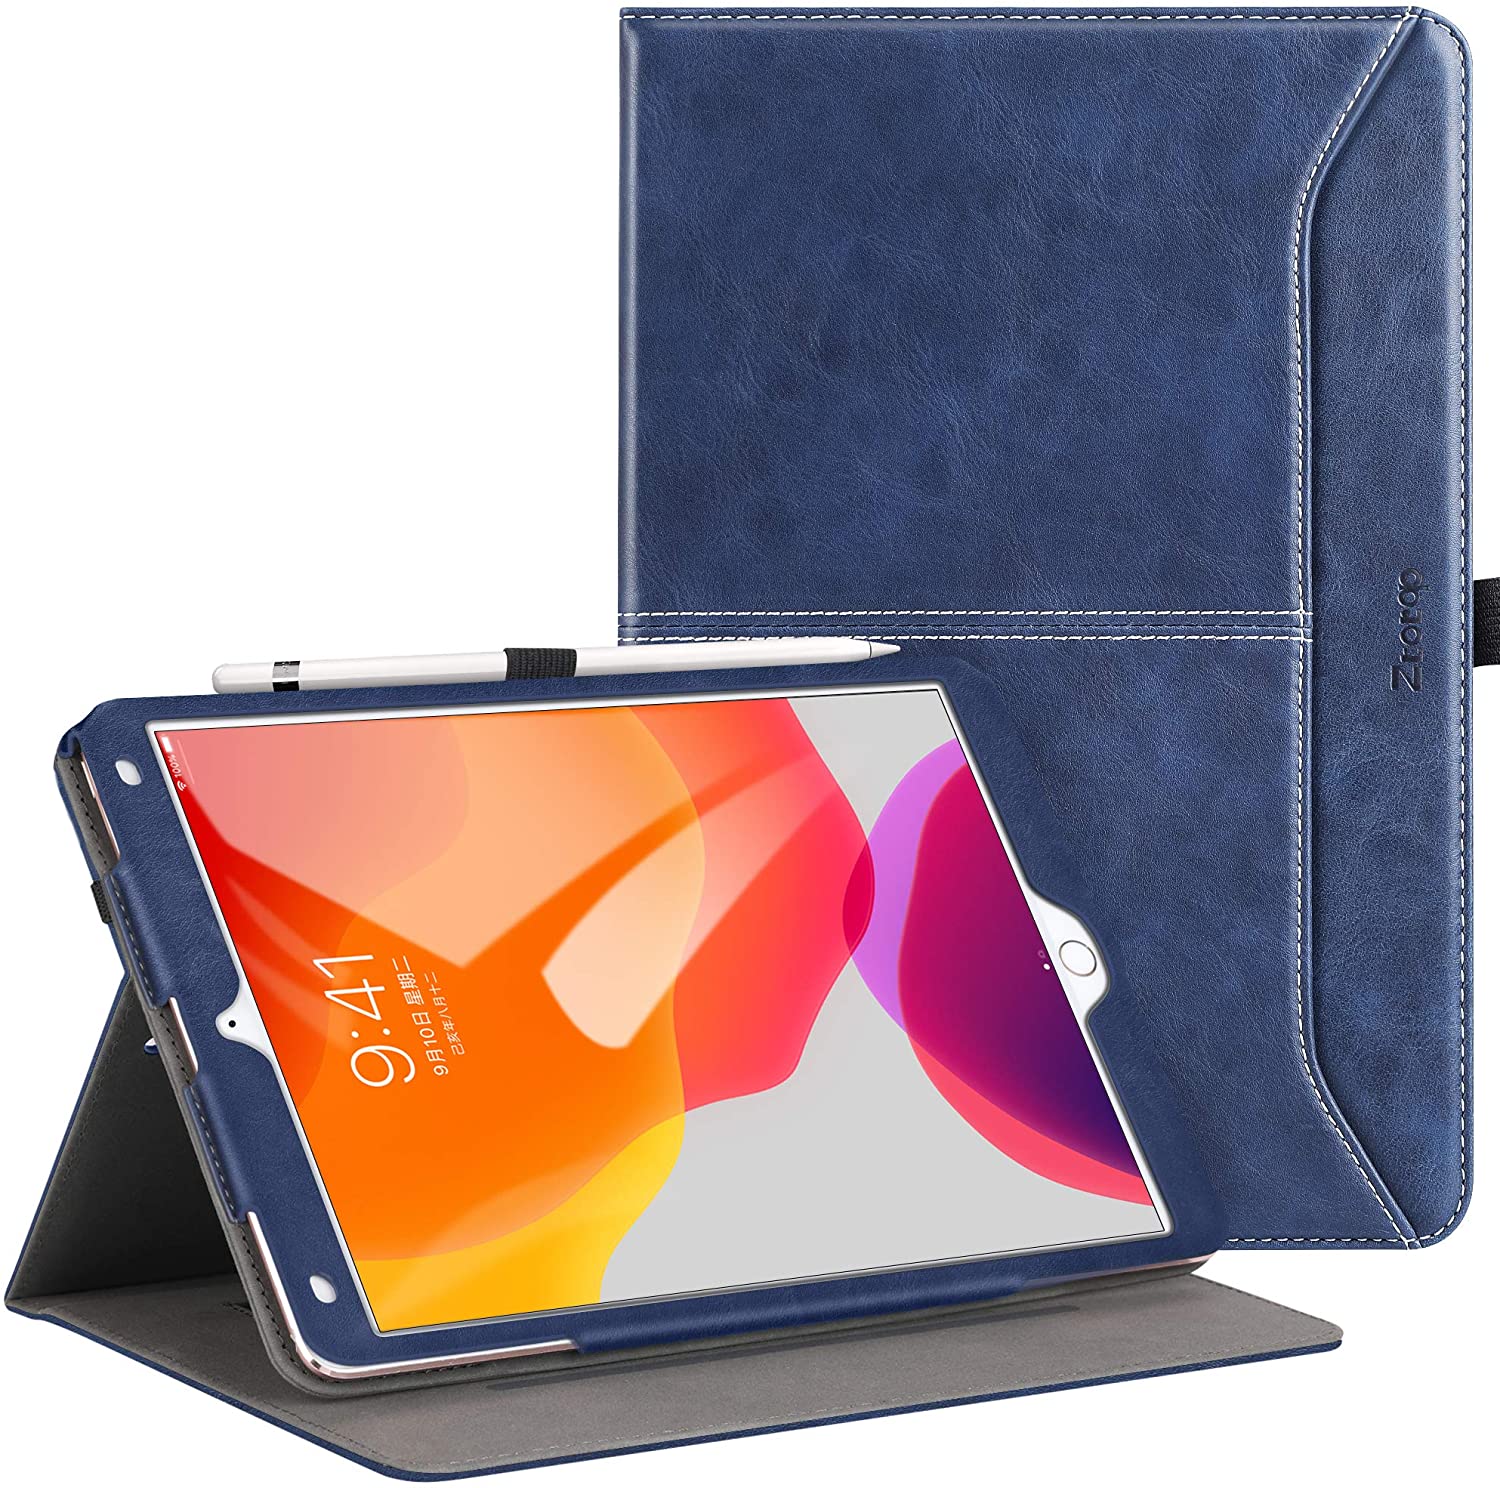 7th Generation Ztotops for iPad 10.2 2019 ,Premium Leather Business Folio Case Cover,with Stand,Pocket and Auto Wake/Sleep Function,Multi-angle Cover for iPad 10.2 inch,Black